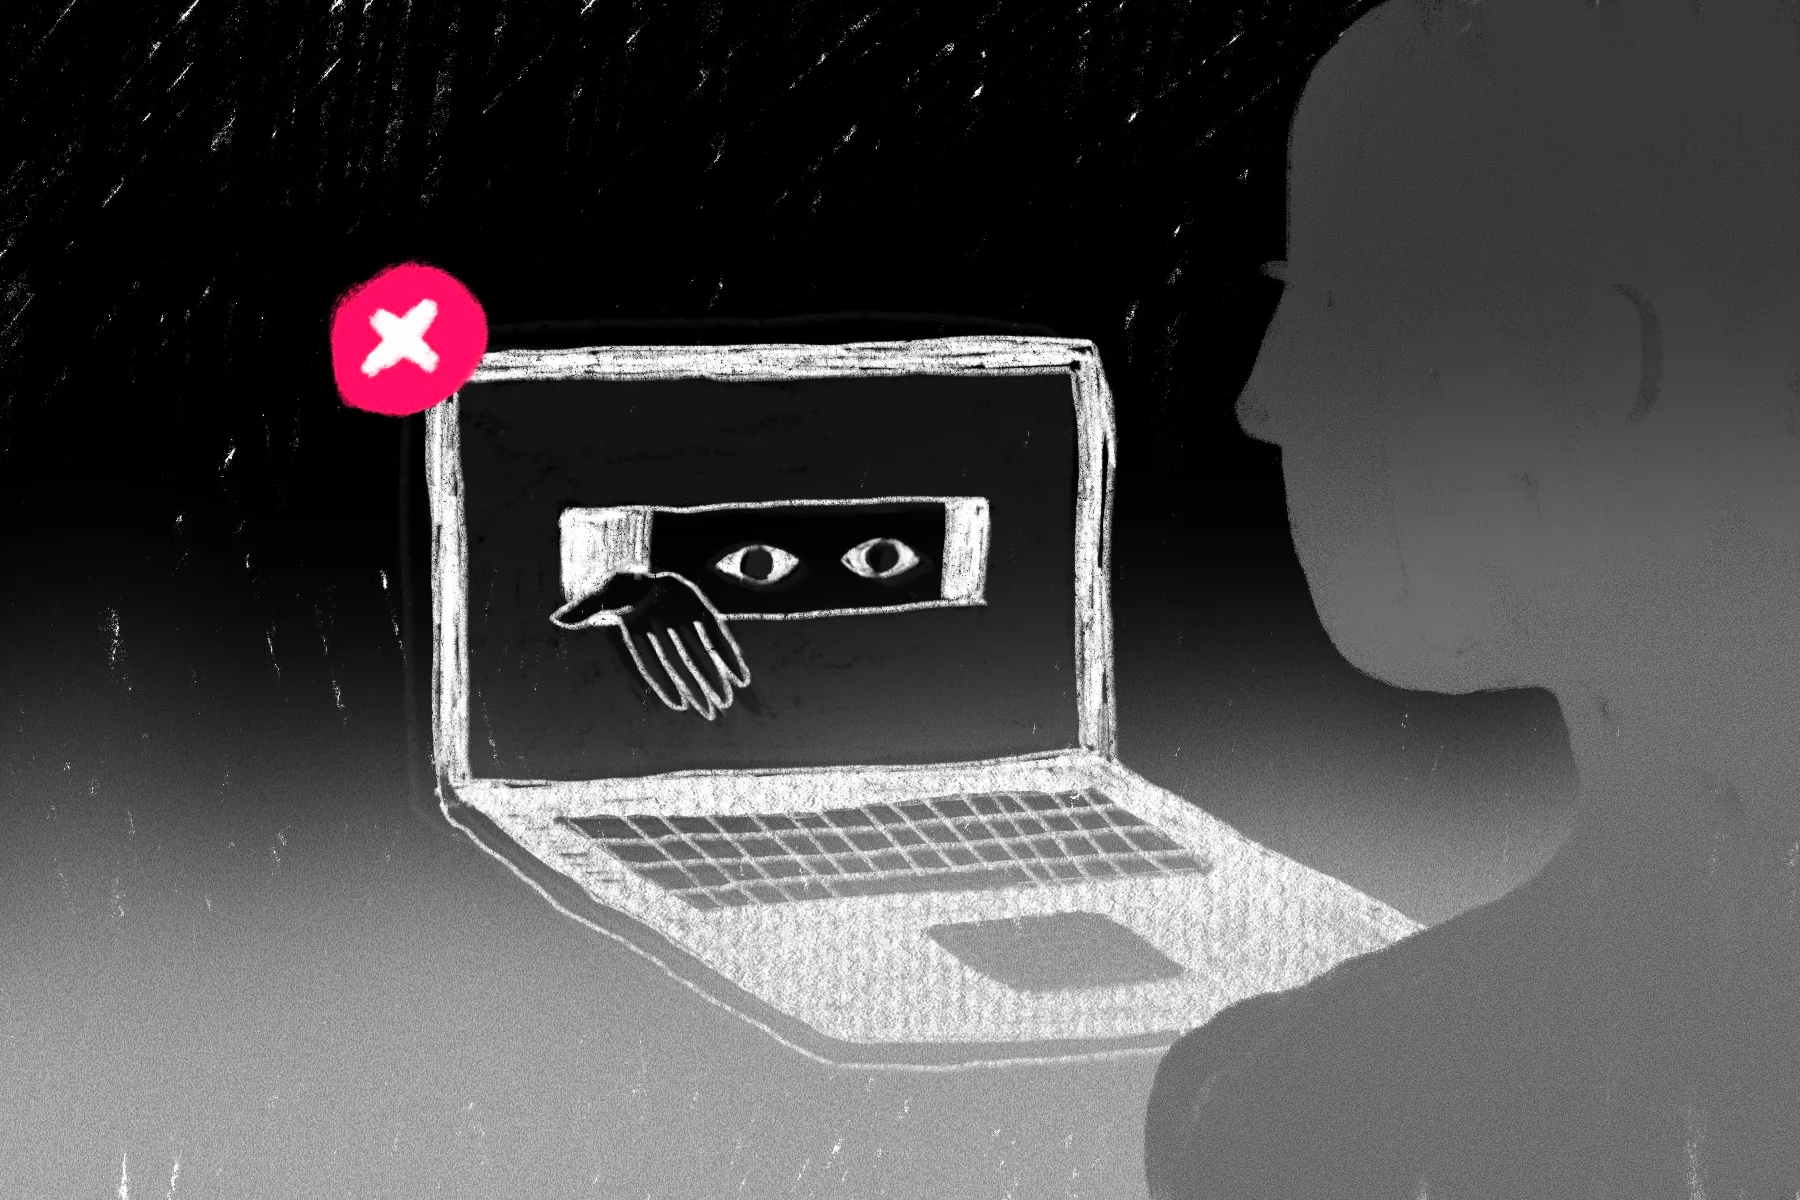 Illustration of a laptop with a face looking through a peephole, extending a hand through the screen towards the user.